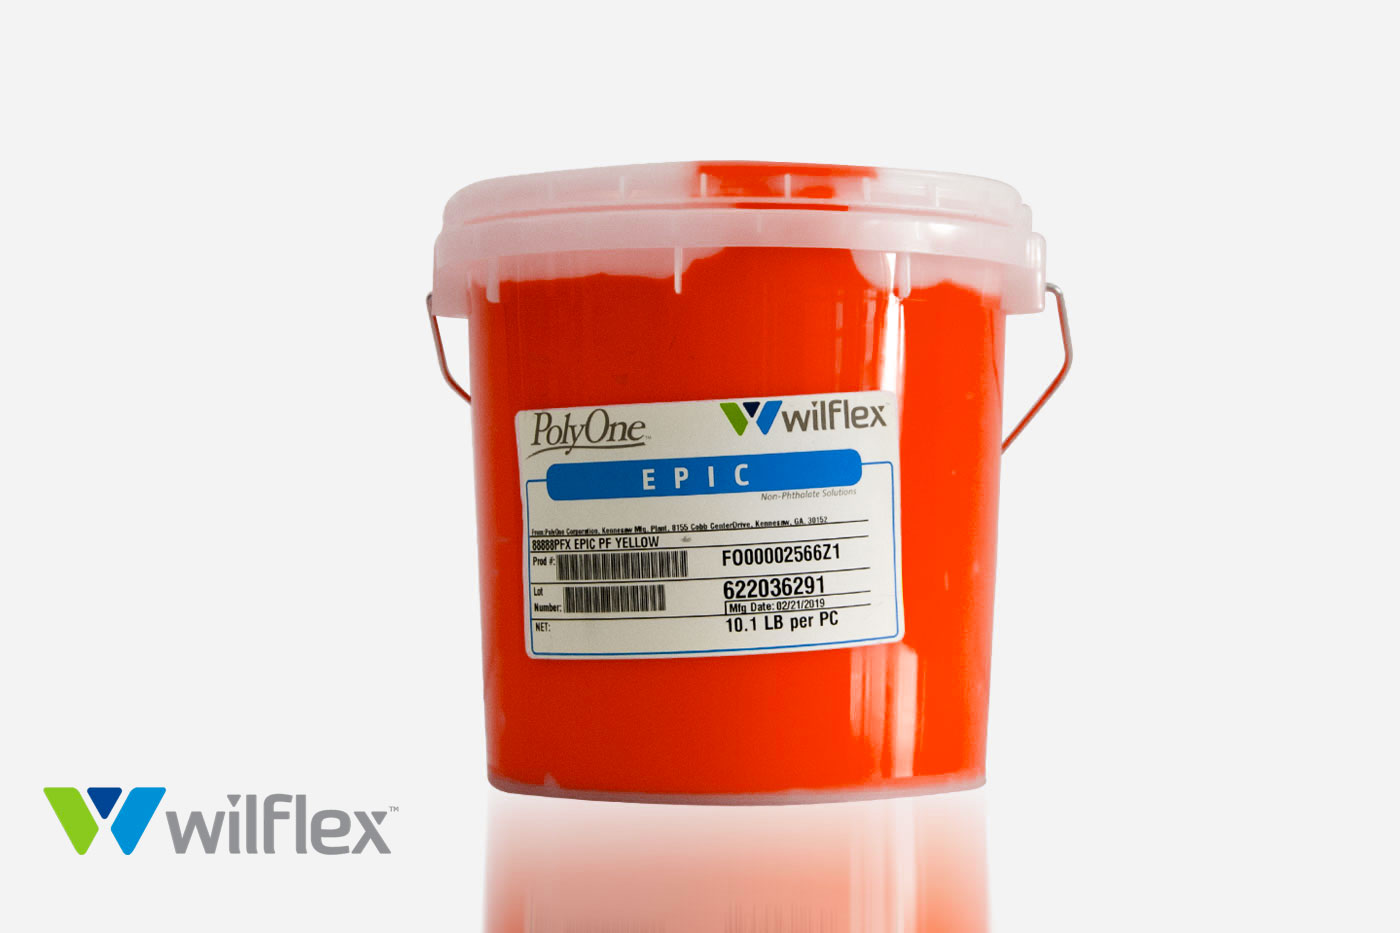 Wilflex Epic Rio Color Matching